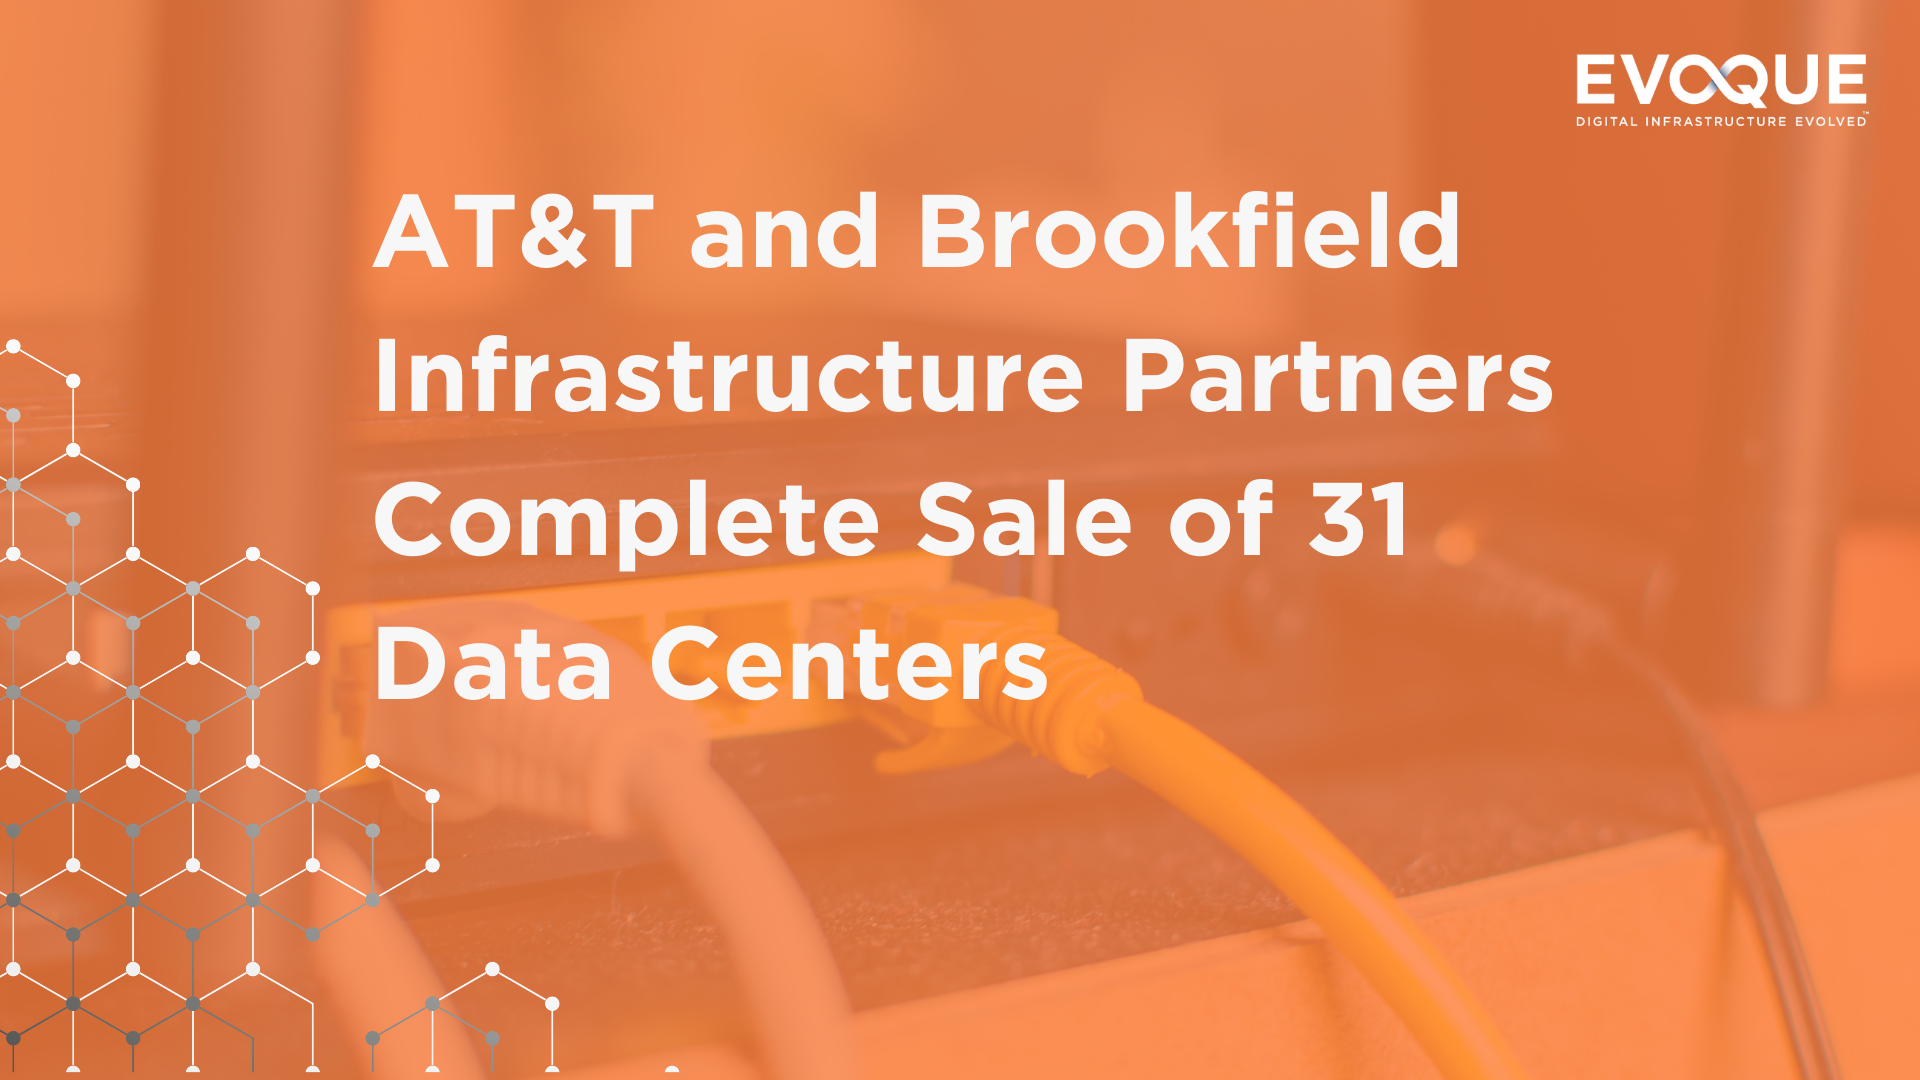 AT&T and Brookfield Infrastructure Partners Complete Sale of 31 Data Centers